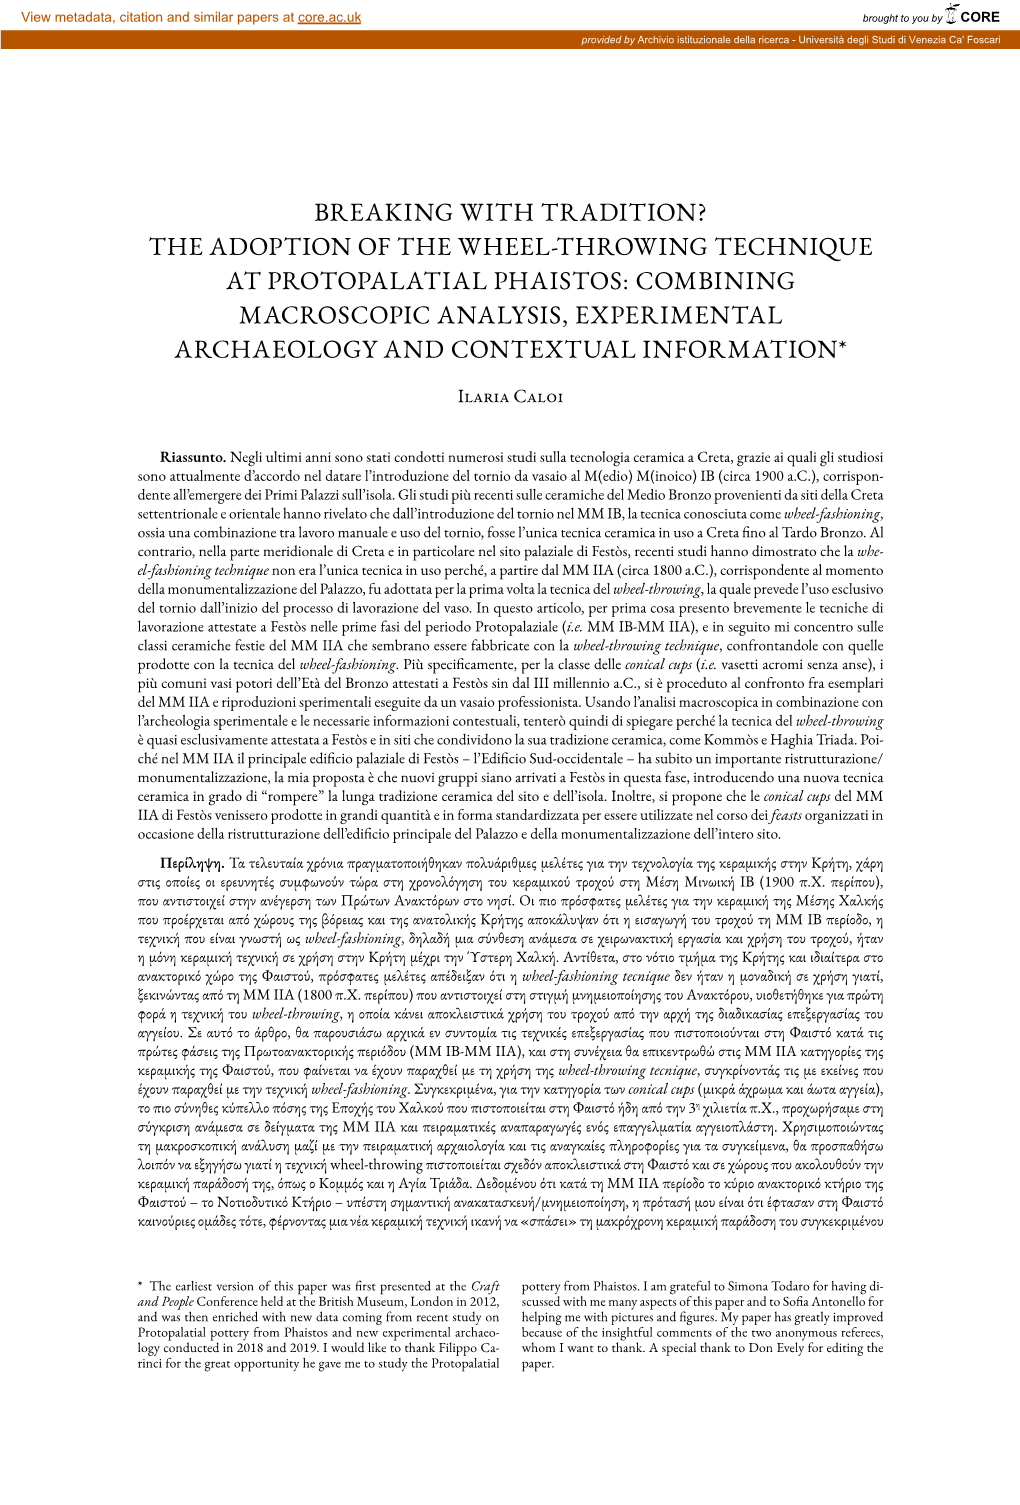 The Adoption of the Wheel-Throwing Technique at Protopalatial Phaistos: Combining Macroscopic Analysis, Experimental Archaeology and Contextual Information*